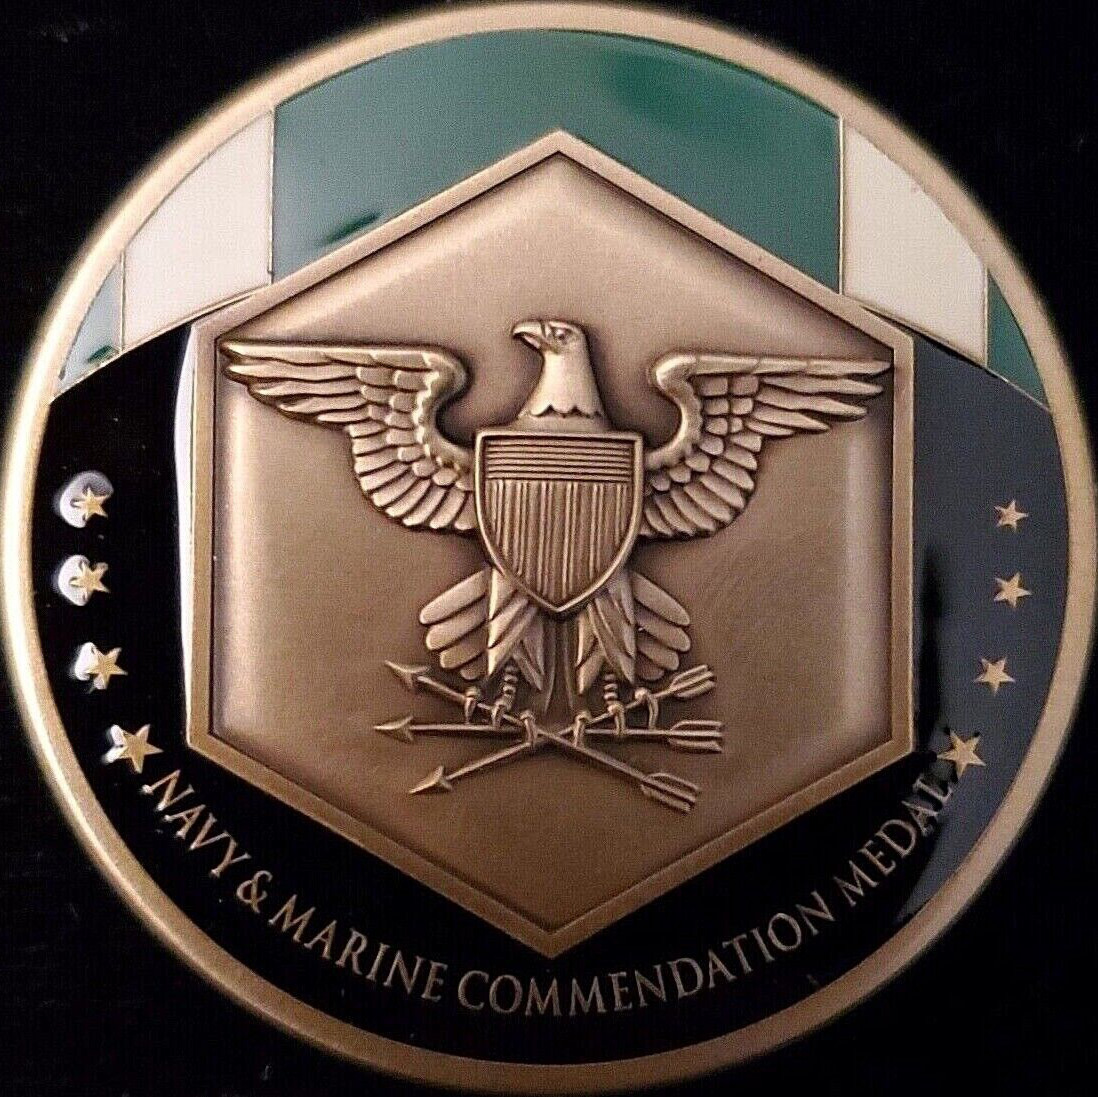 US Navy & US Marine Corps Commendation Medal Award Challenge Coin NWTM USA